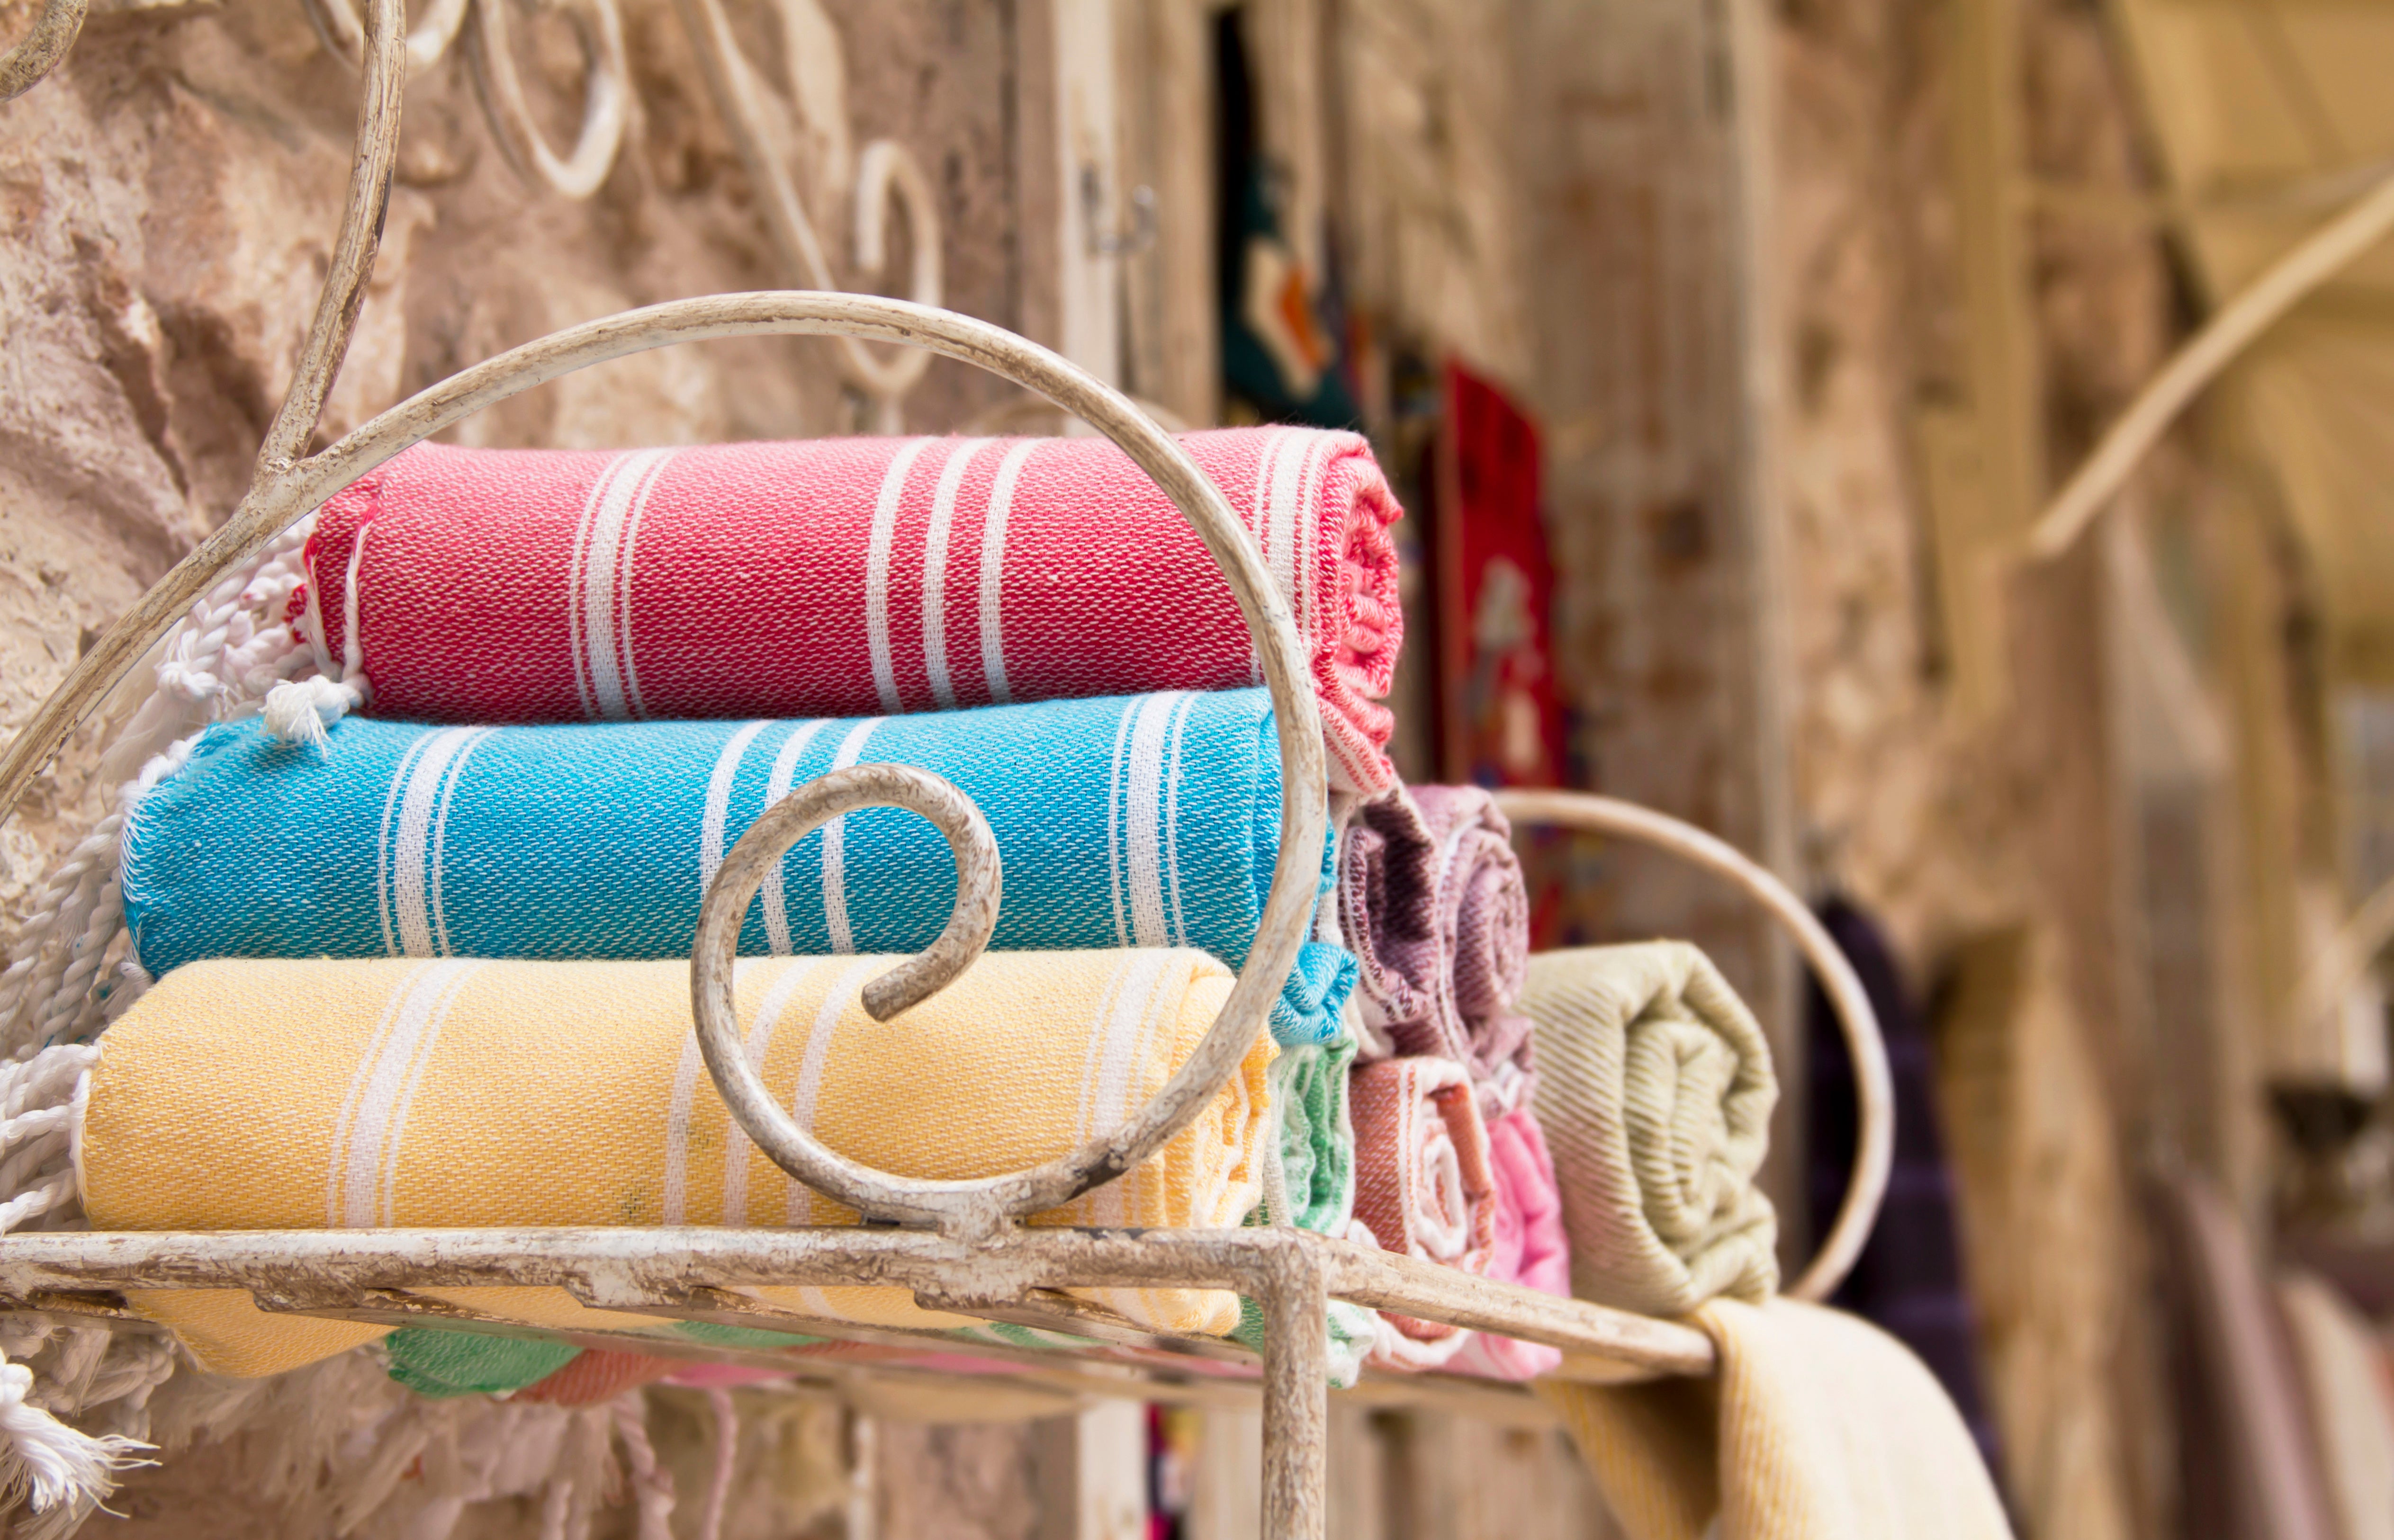 8 Questions You've Always Wanted to Ask About Turkish Towels